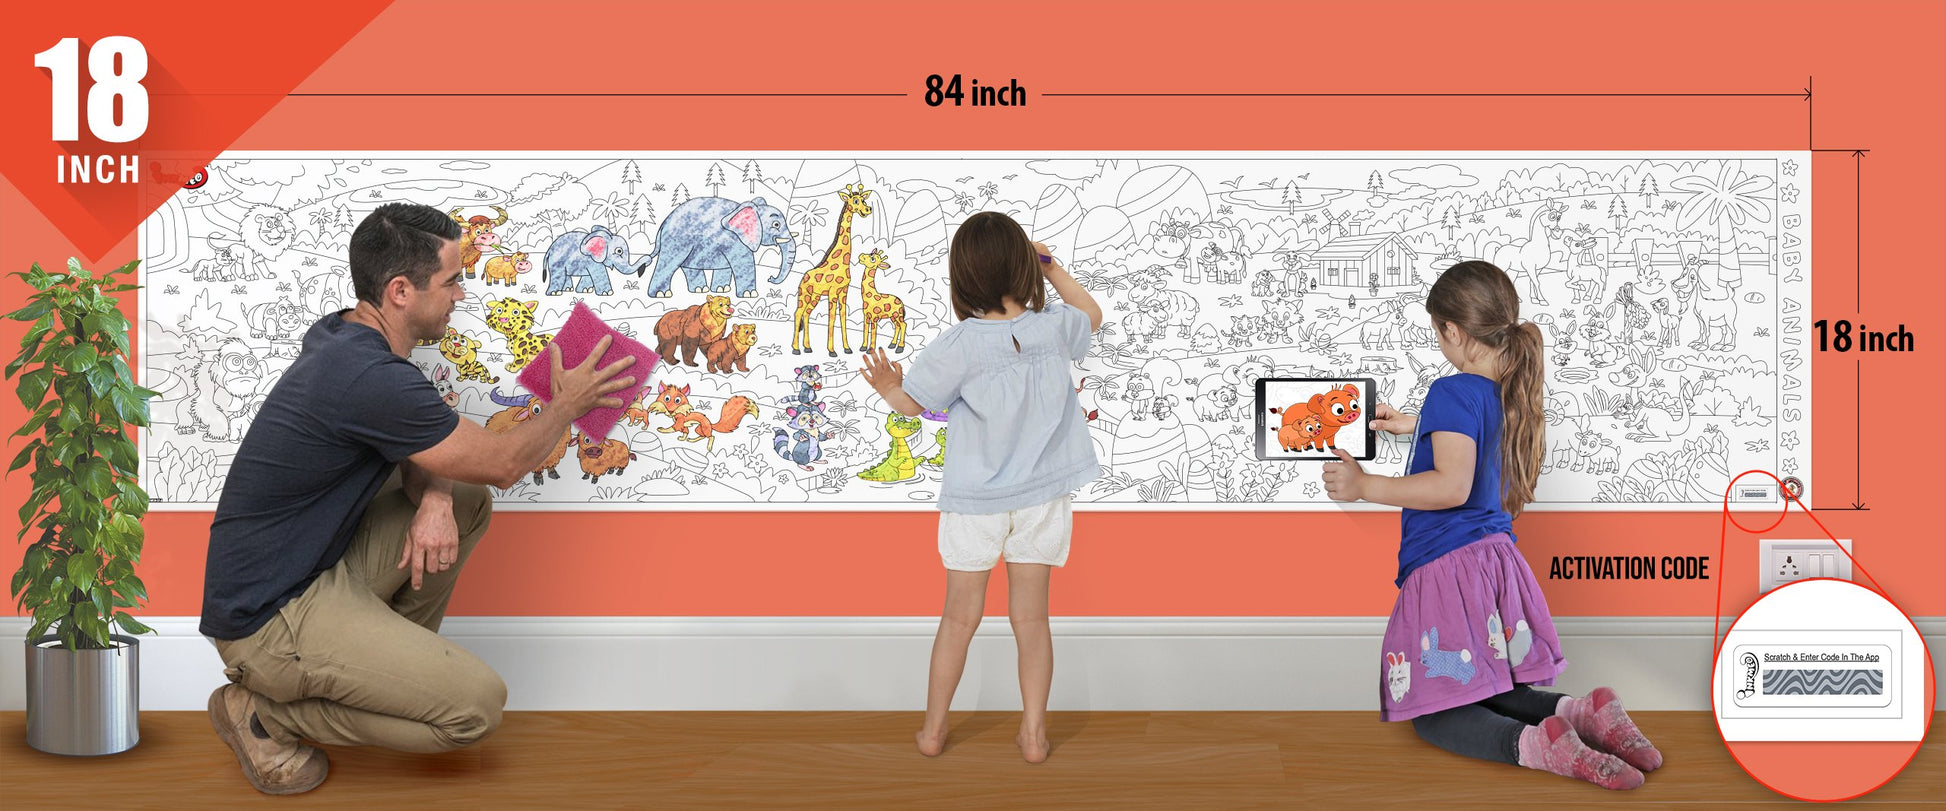  The image depicts a father and his two daughters enjoying a bonding moment while colouring baby animals roll attached to the wall.